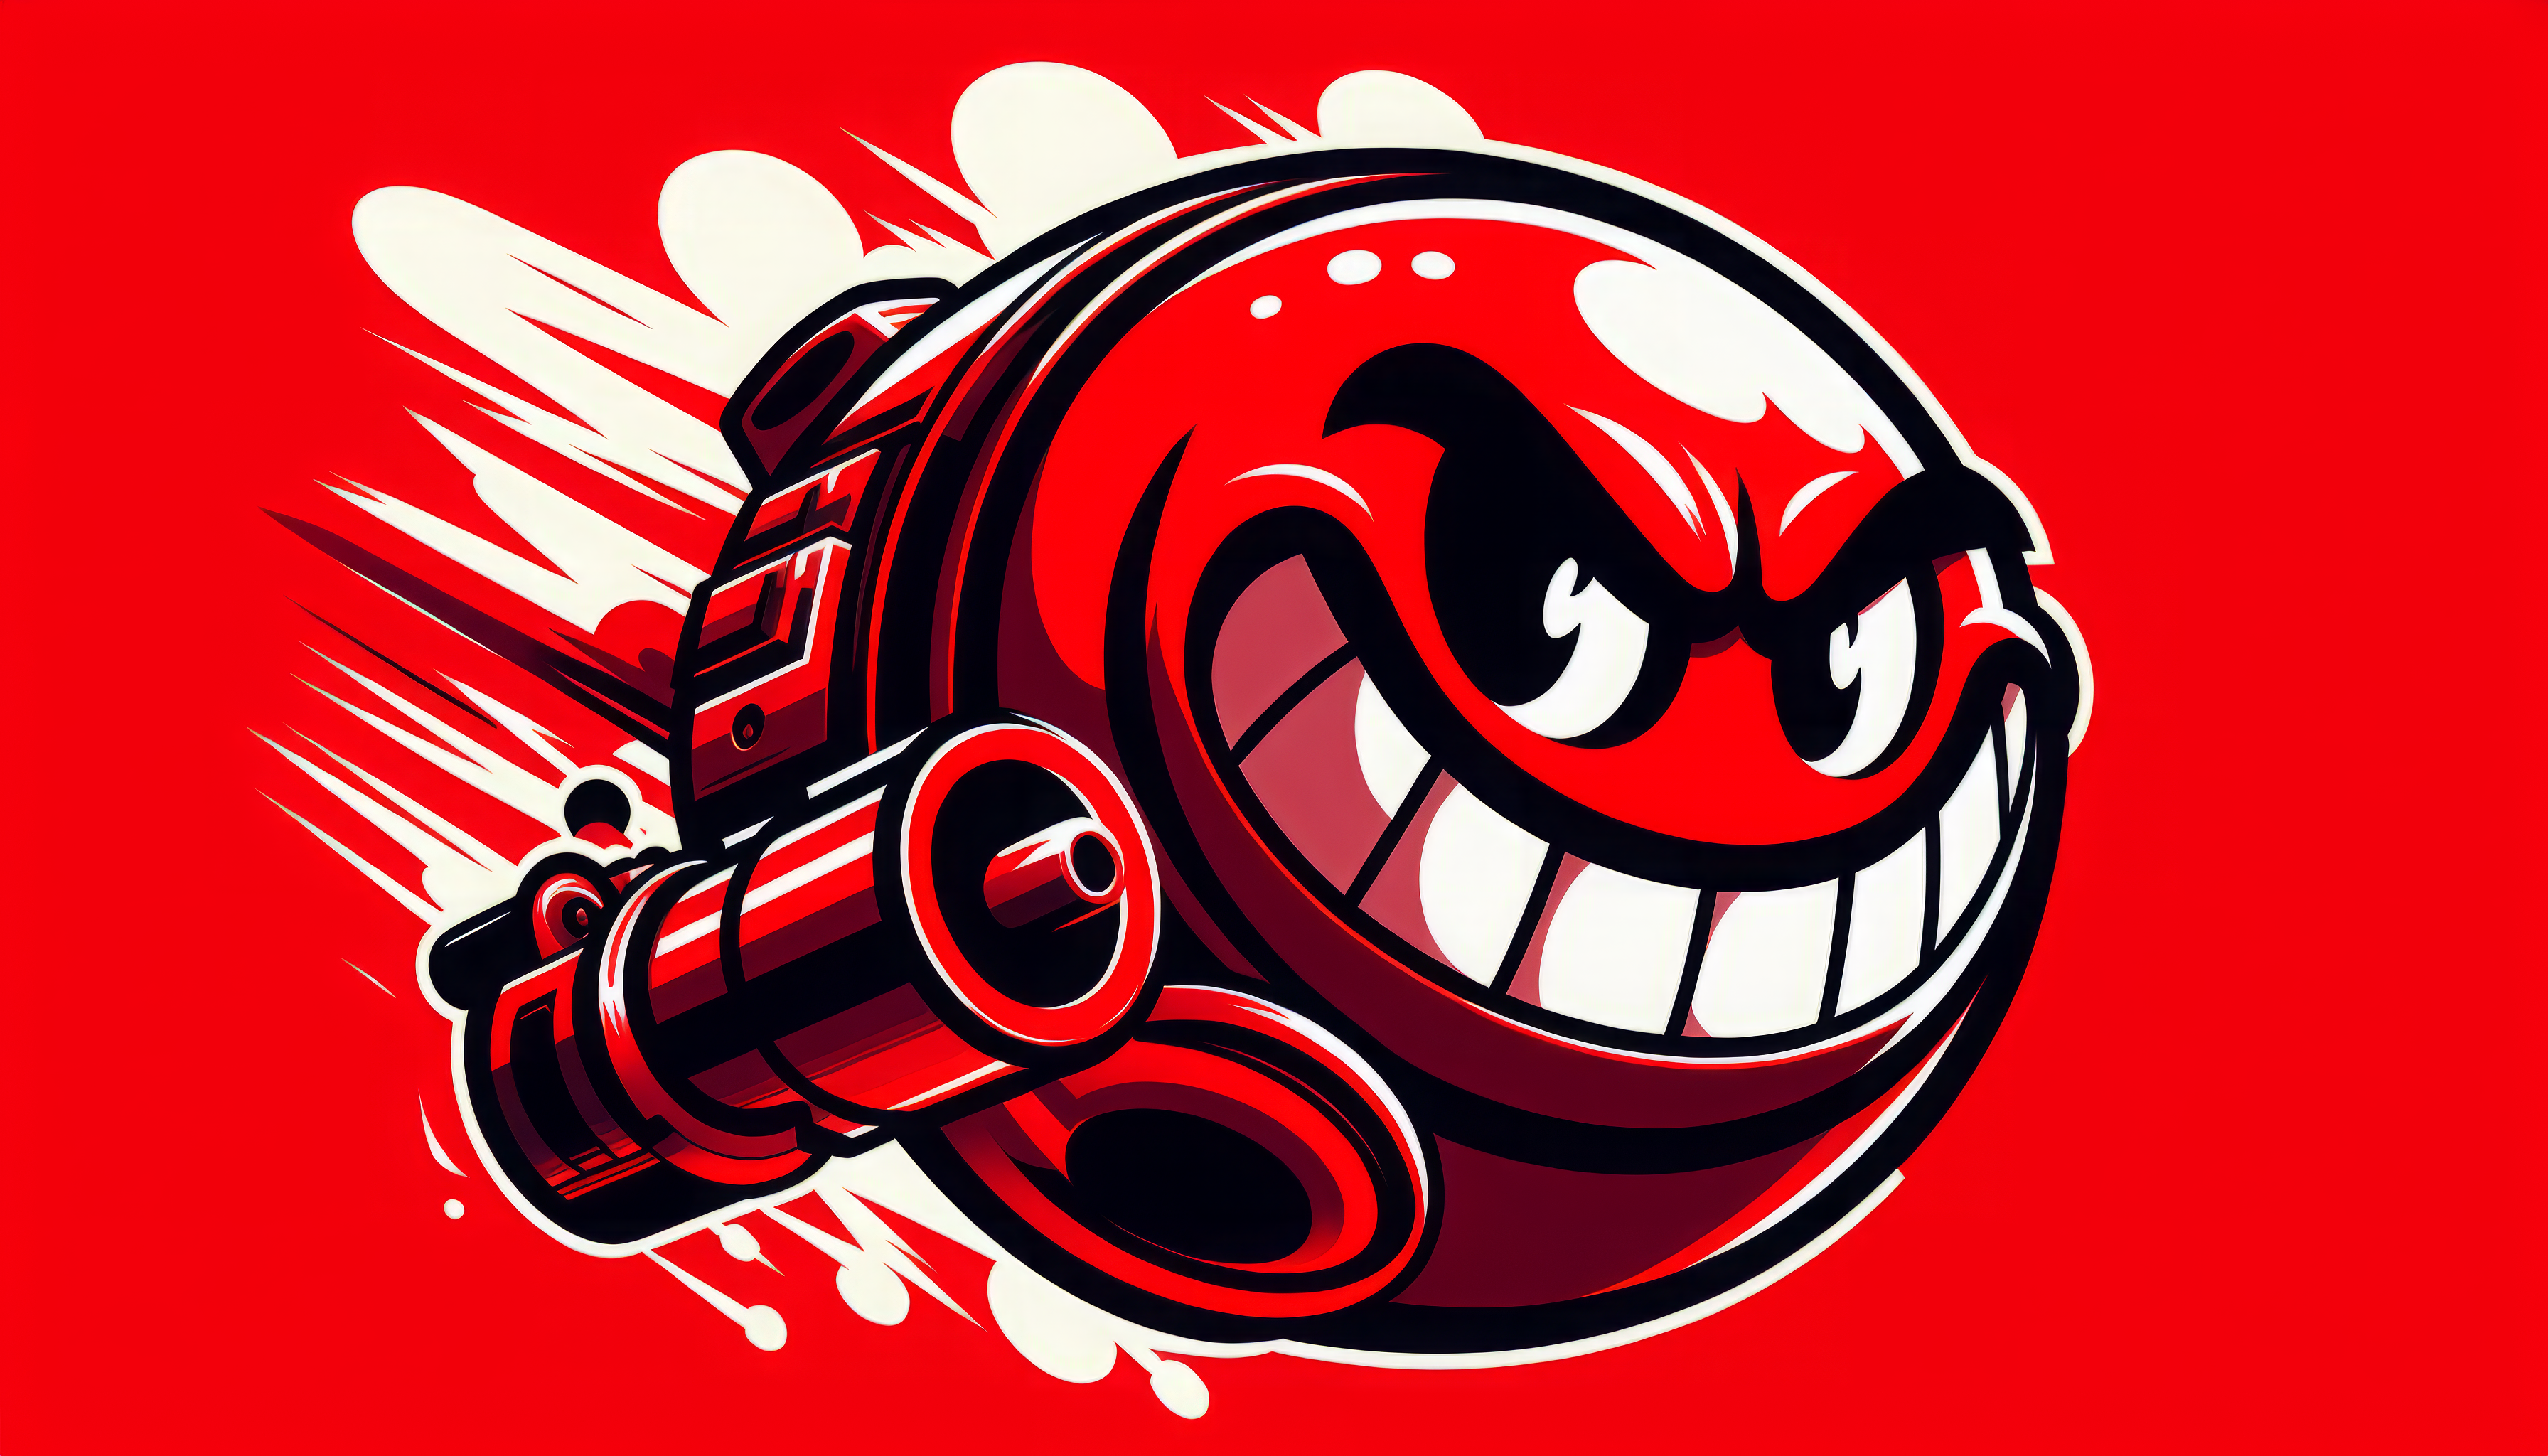 HD desktop wallpaper featuring a stylized illustration of Bullet Bill character from the Mario series zooming on a vibrant red background.